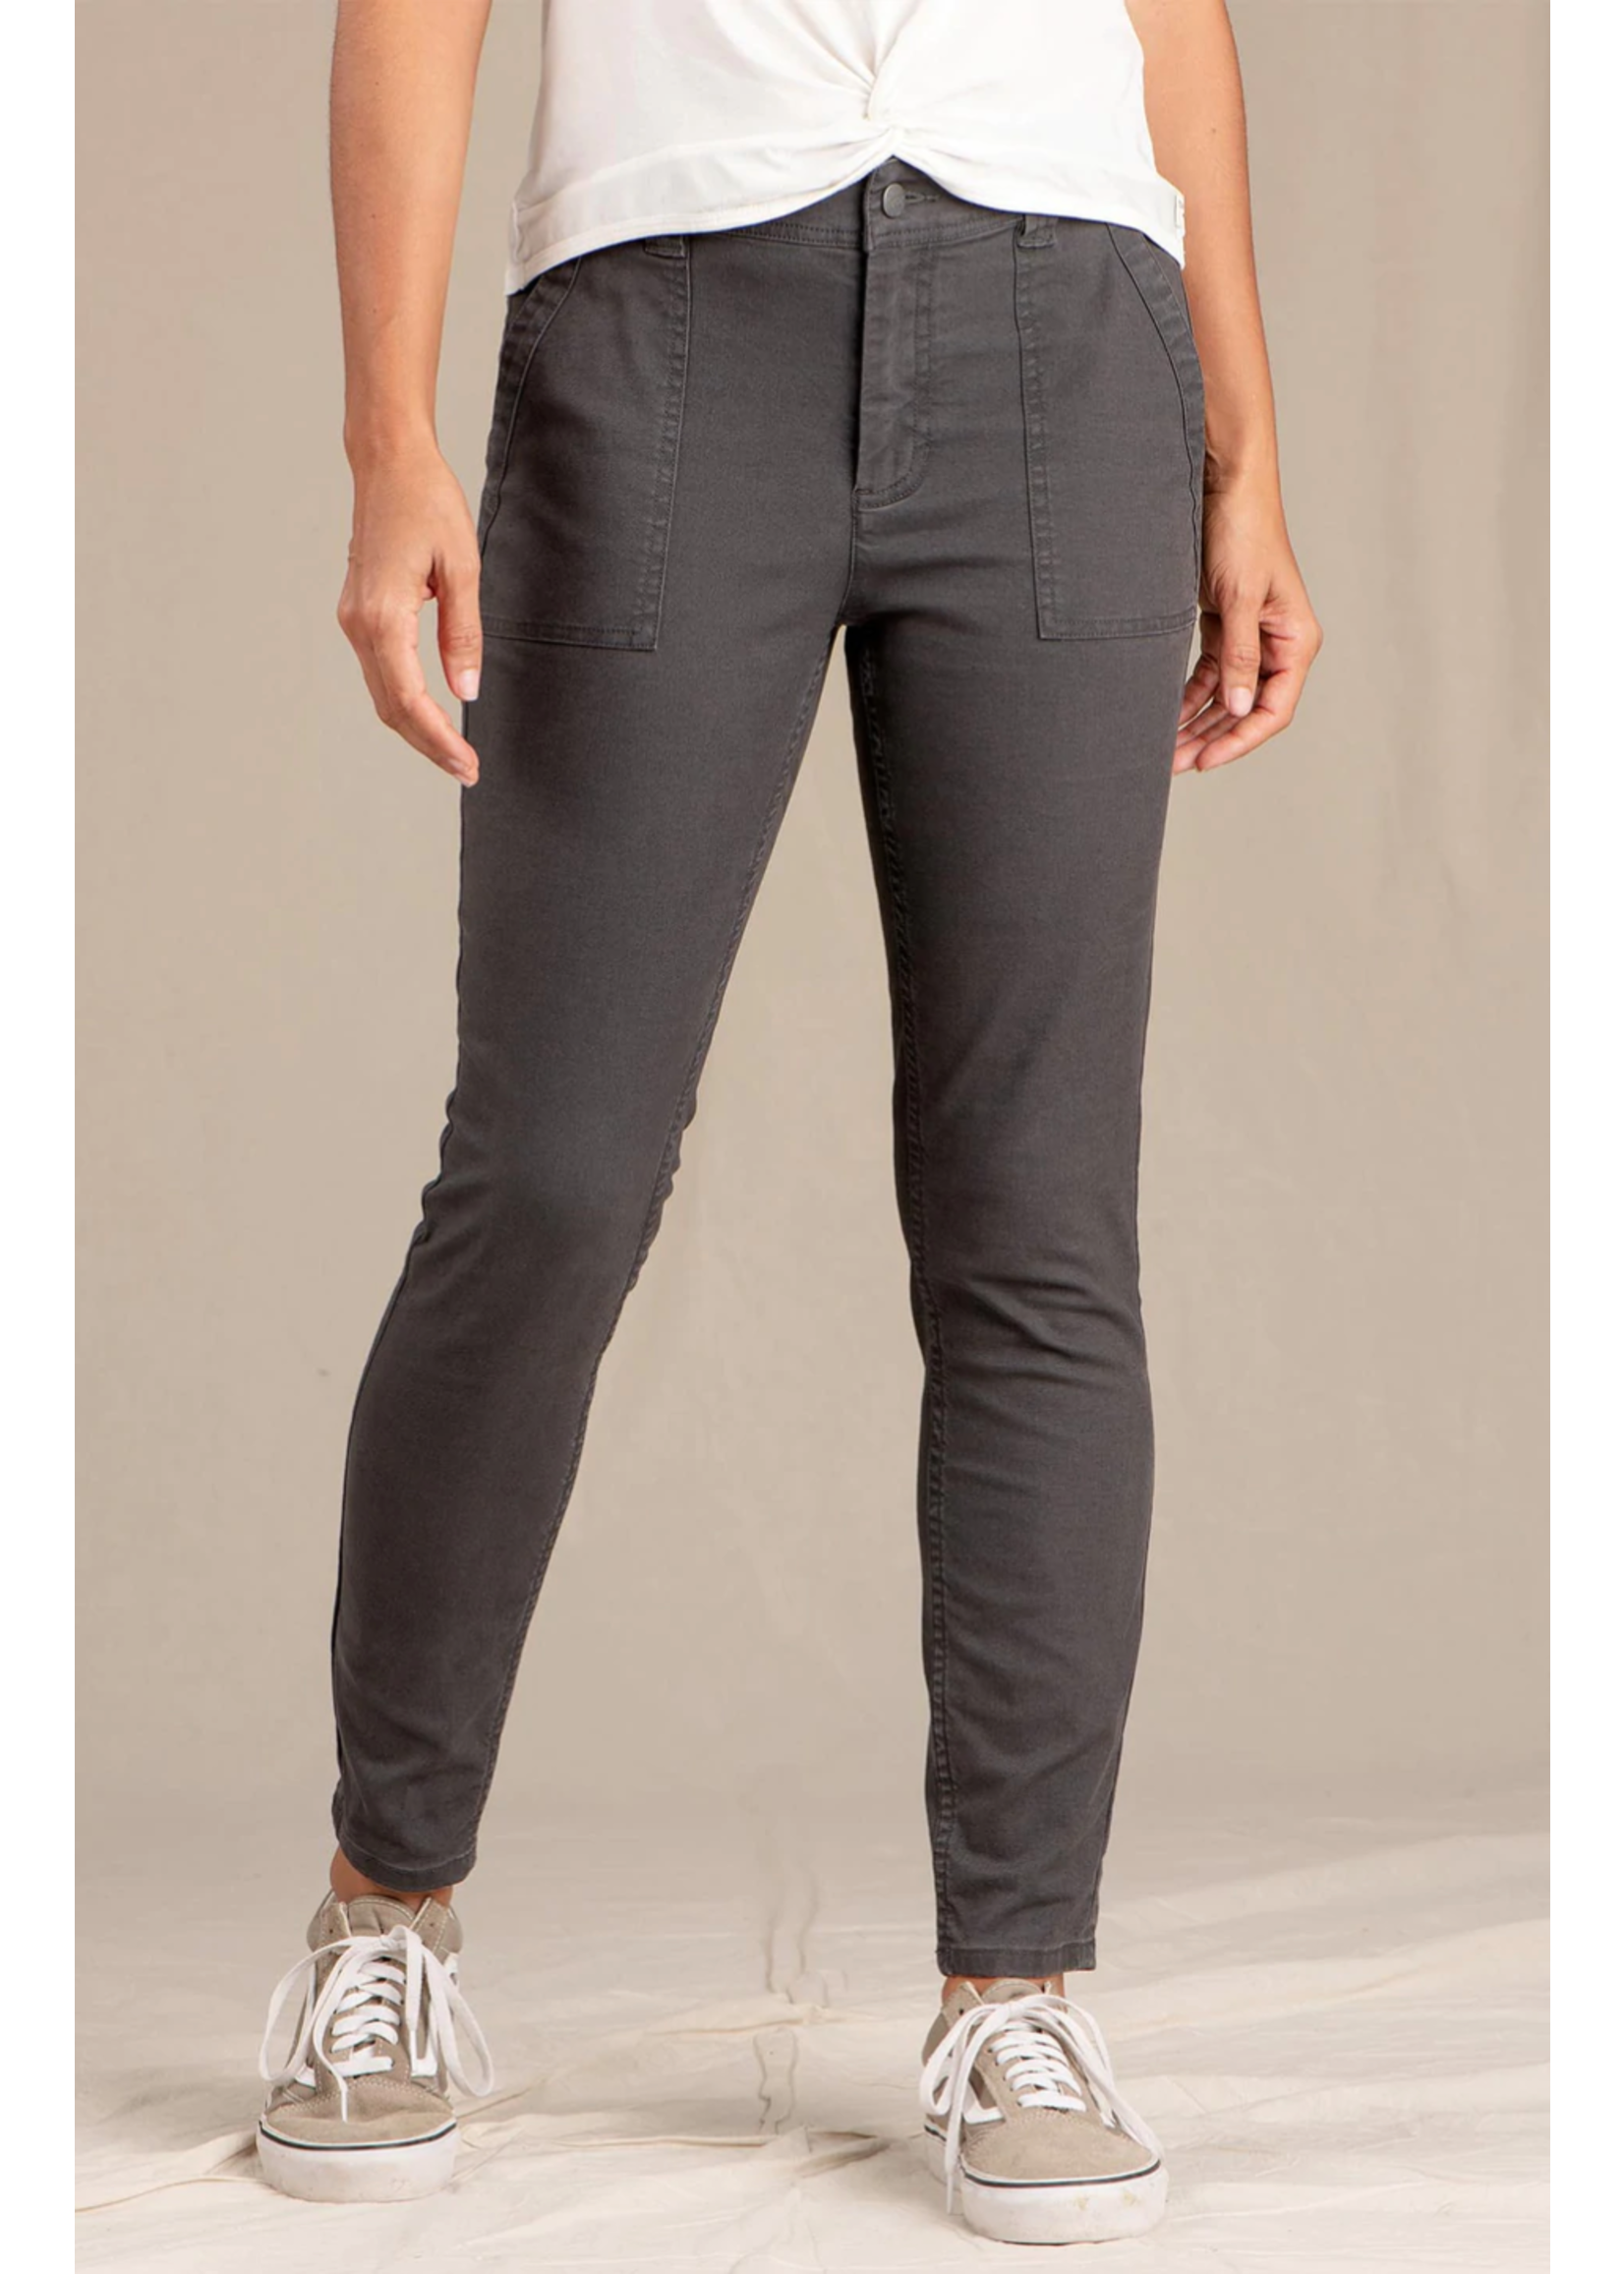 Toad & Co Earthworks Ankle Pant